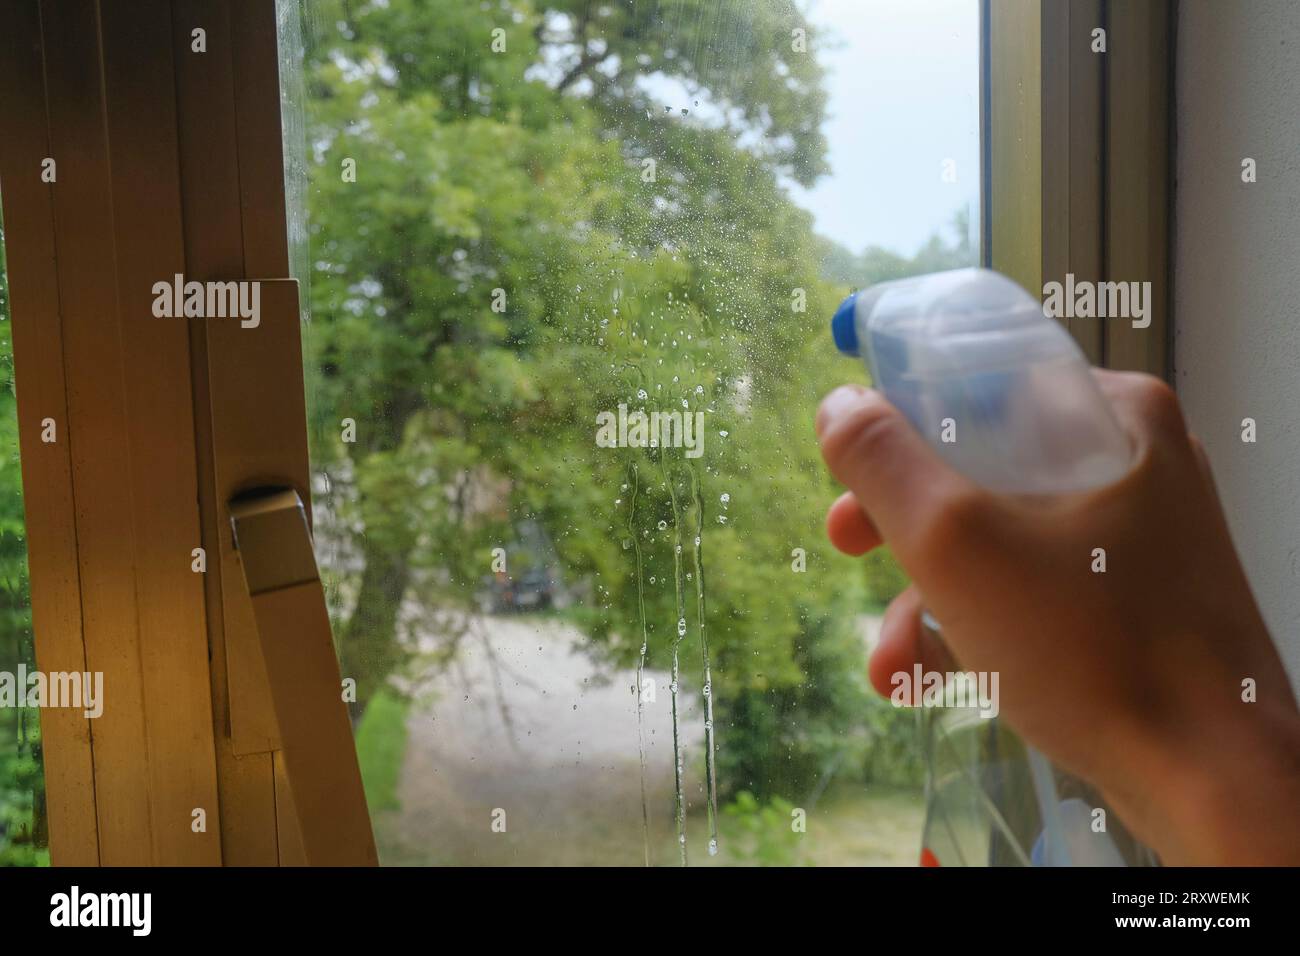 cleaning the window with a window cleaning spray. Hand holding a spray across the window. Cleaning services Stock Photo